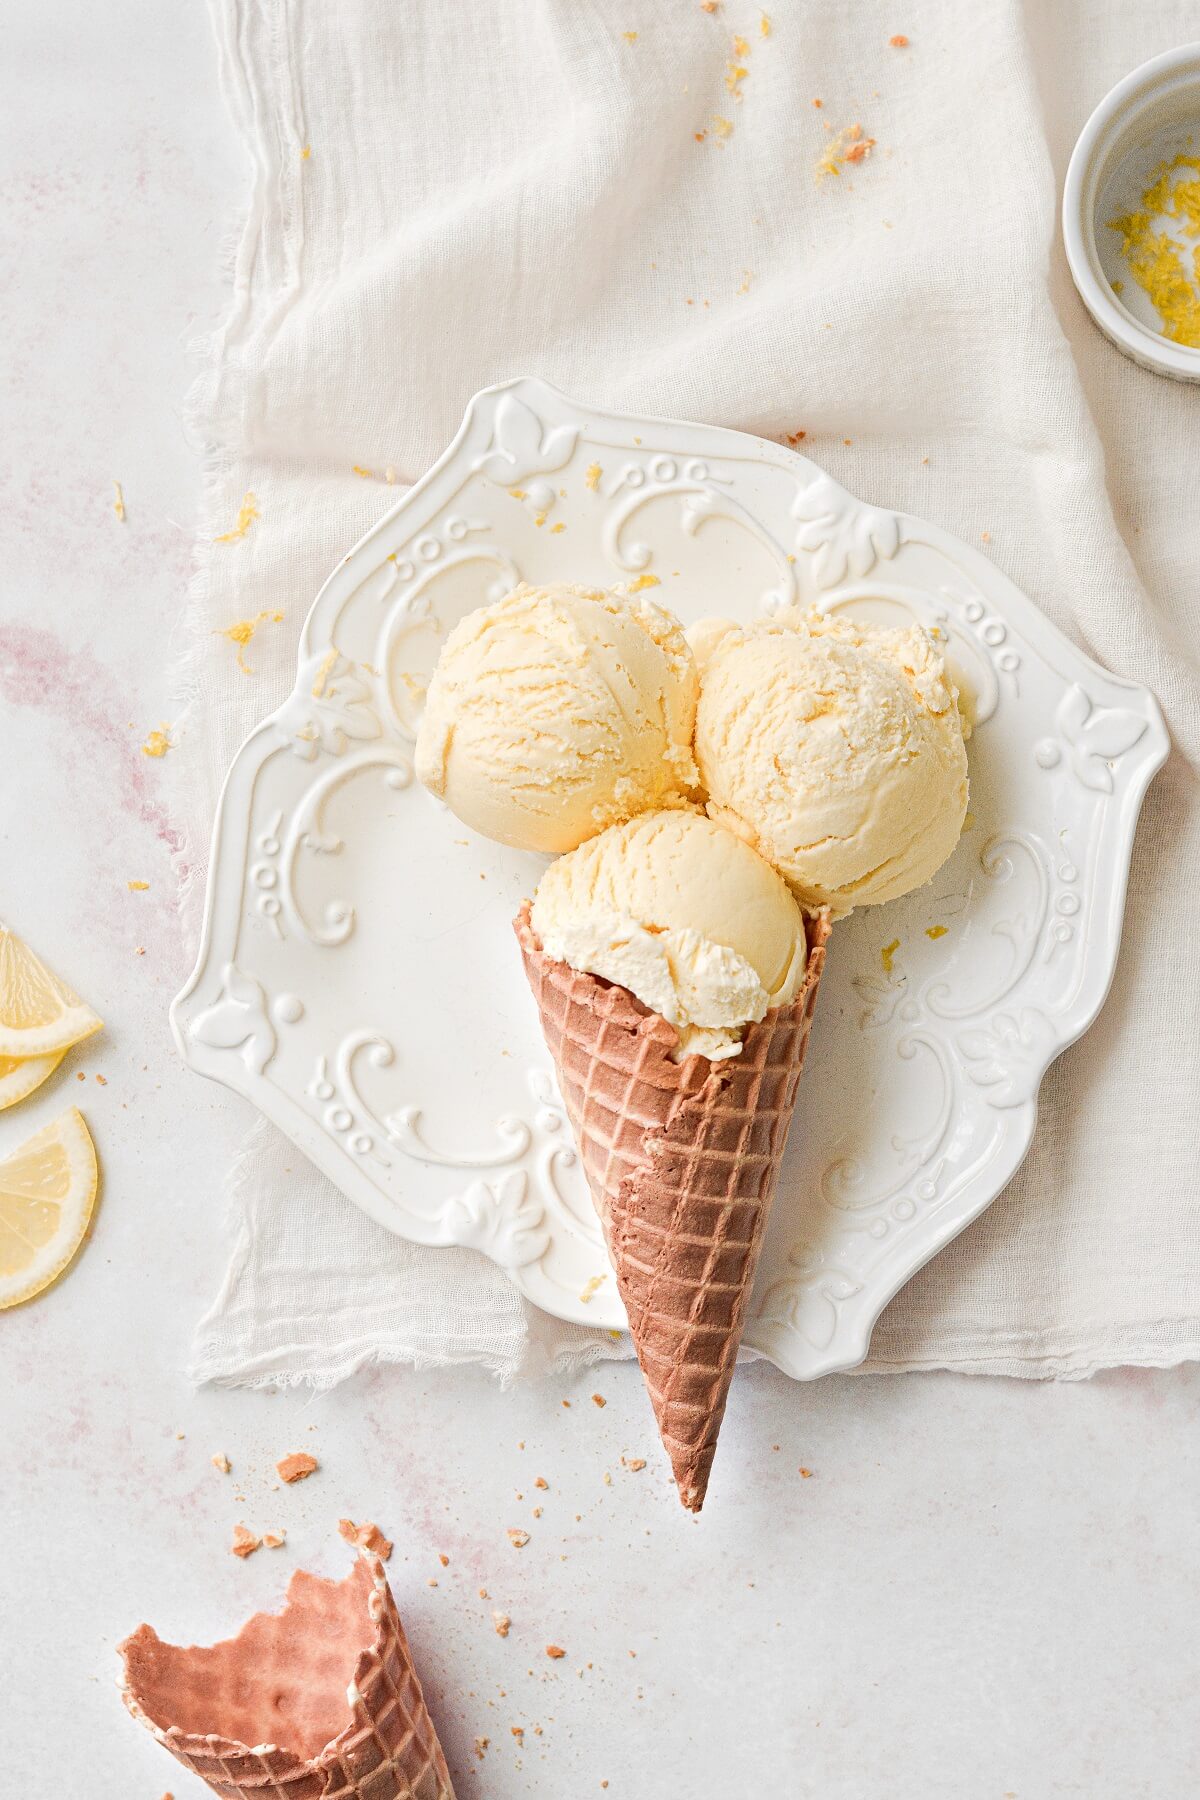 Scoops of lemon ice cream in a waffle cone, on a white plate.